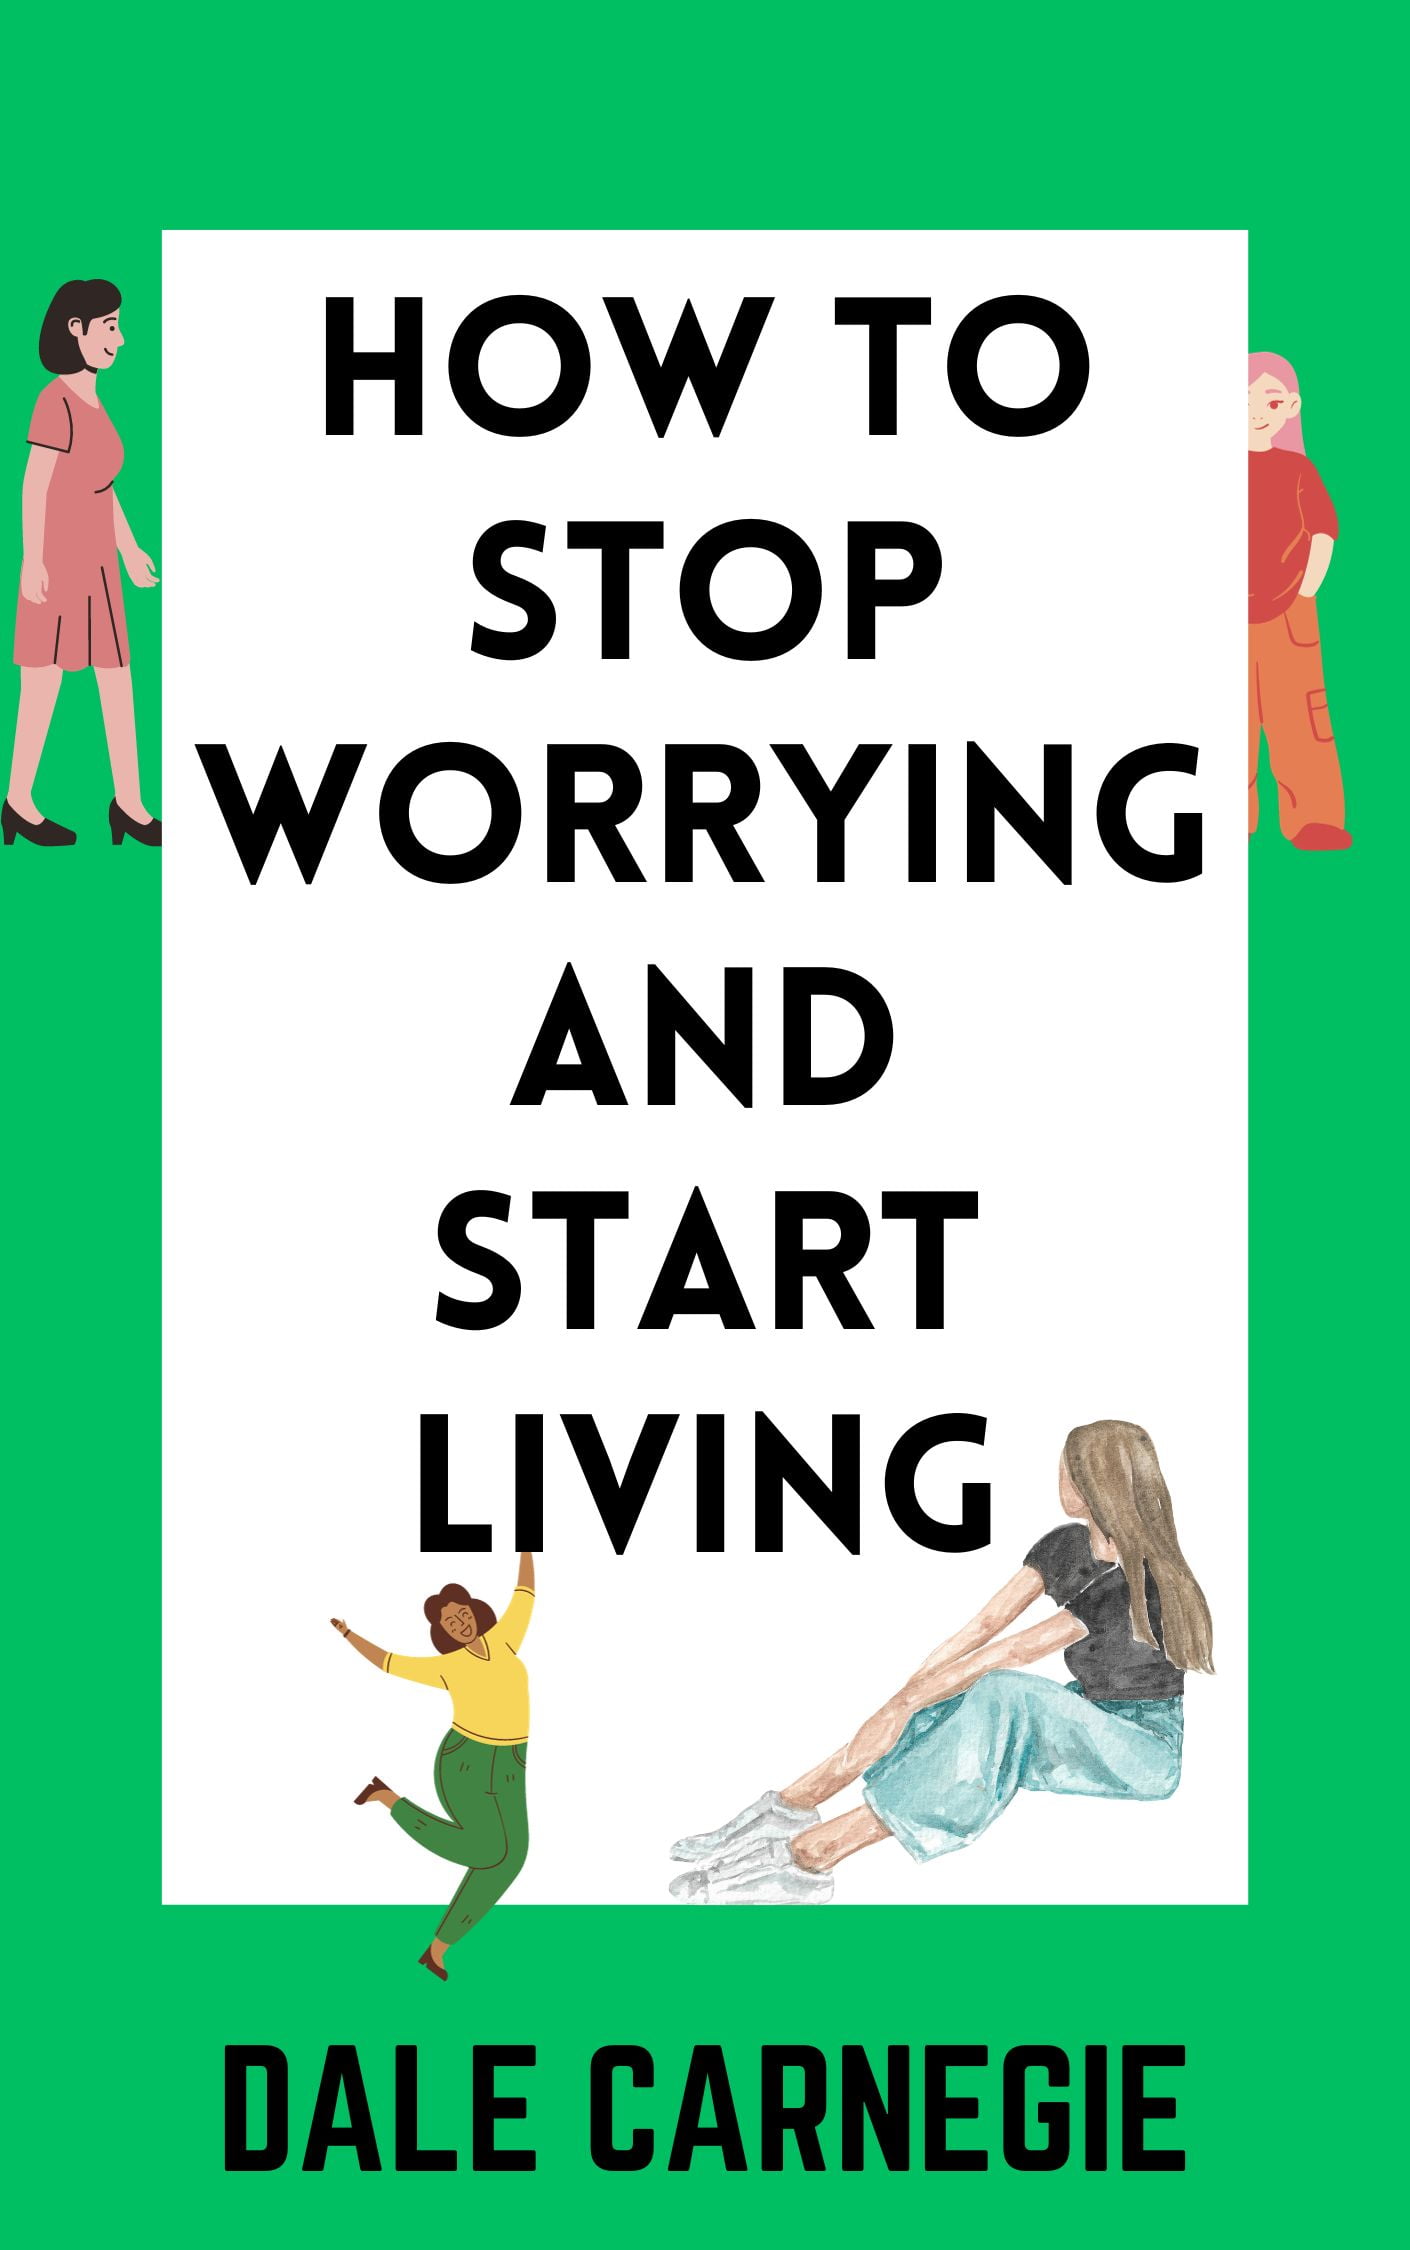 How to Stop worrying and start living